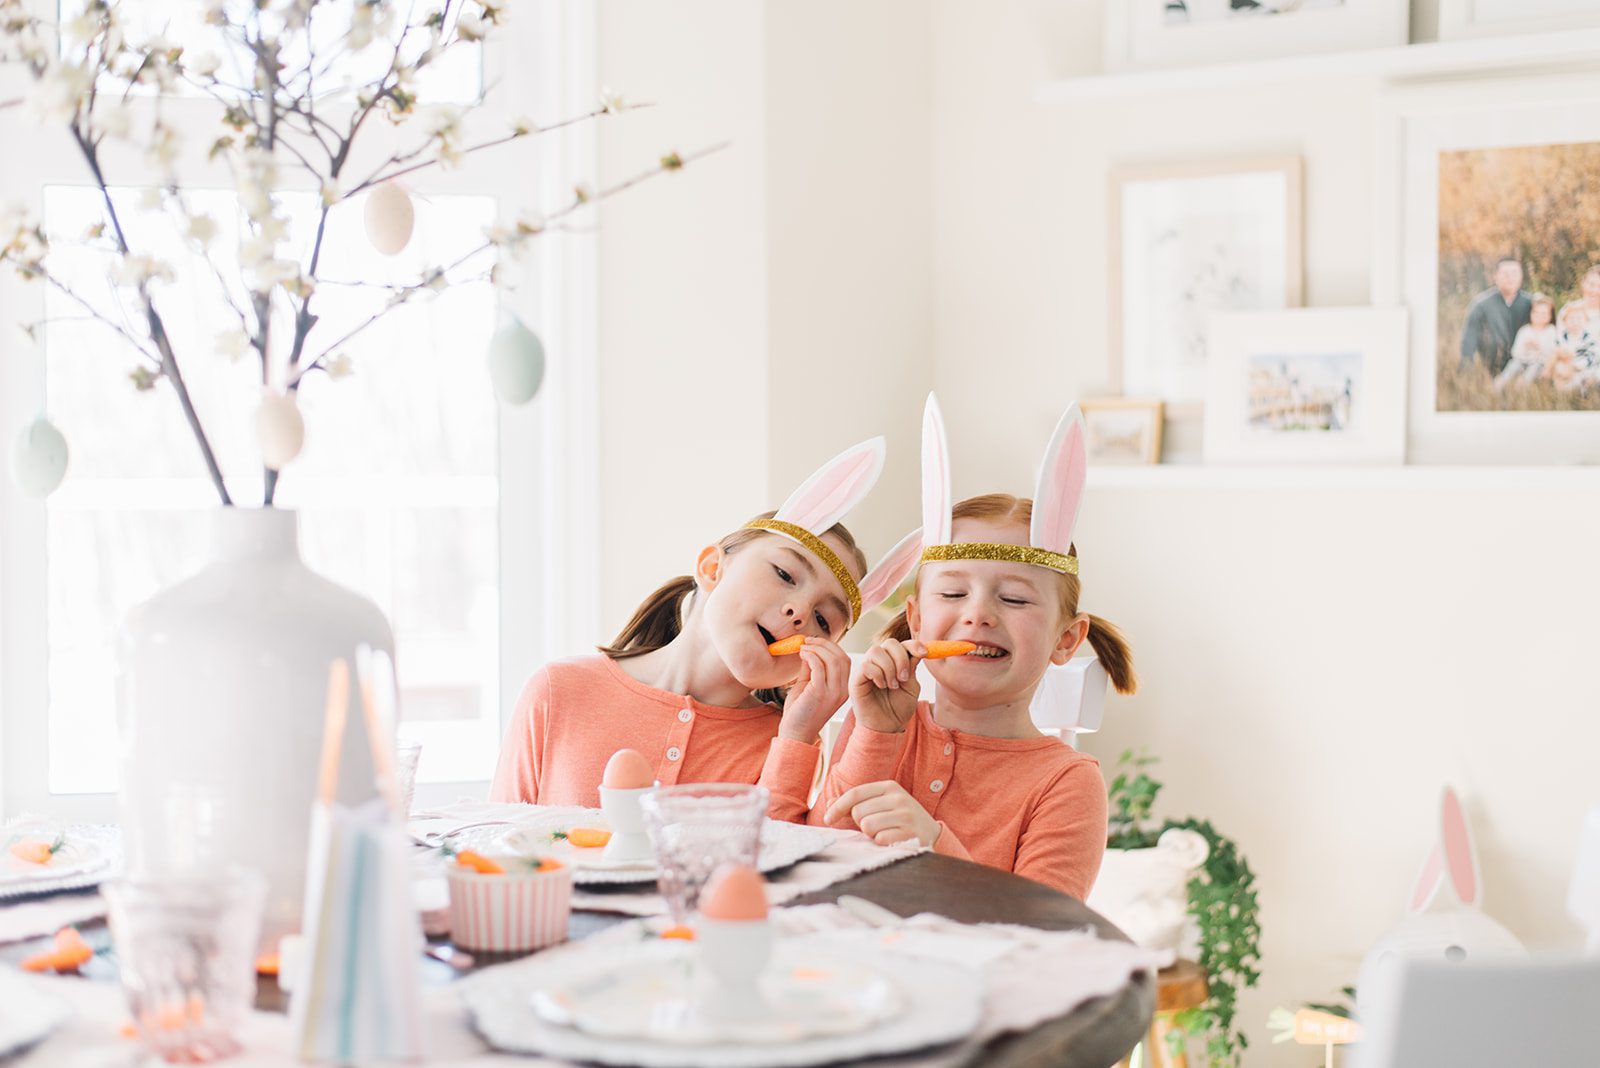 2 little girls with bunny ears sitting at a table set up Easter pretending to eat carrots